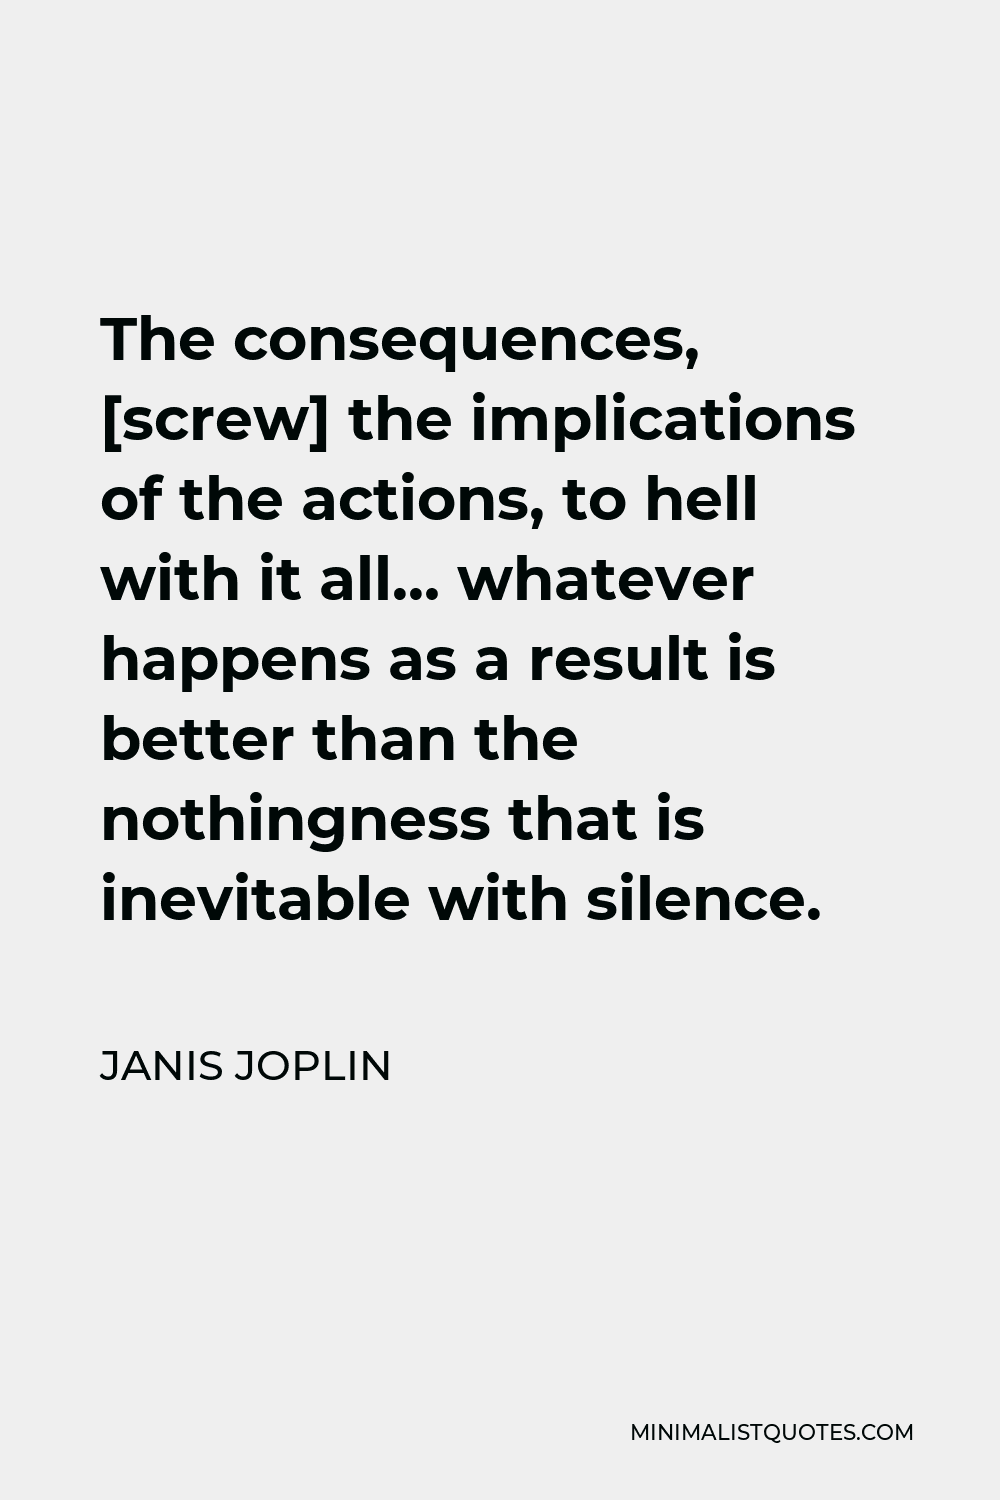 Janis Joplin Quote - The consequences, [screw] the implications of the actions, to hell with it all… whatever happens as a result is better than the nothingness that is inevitable with silence.